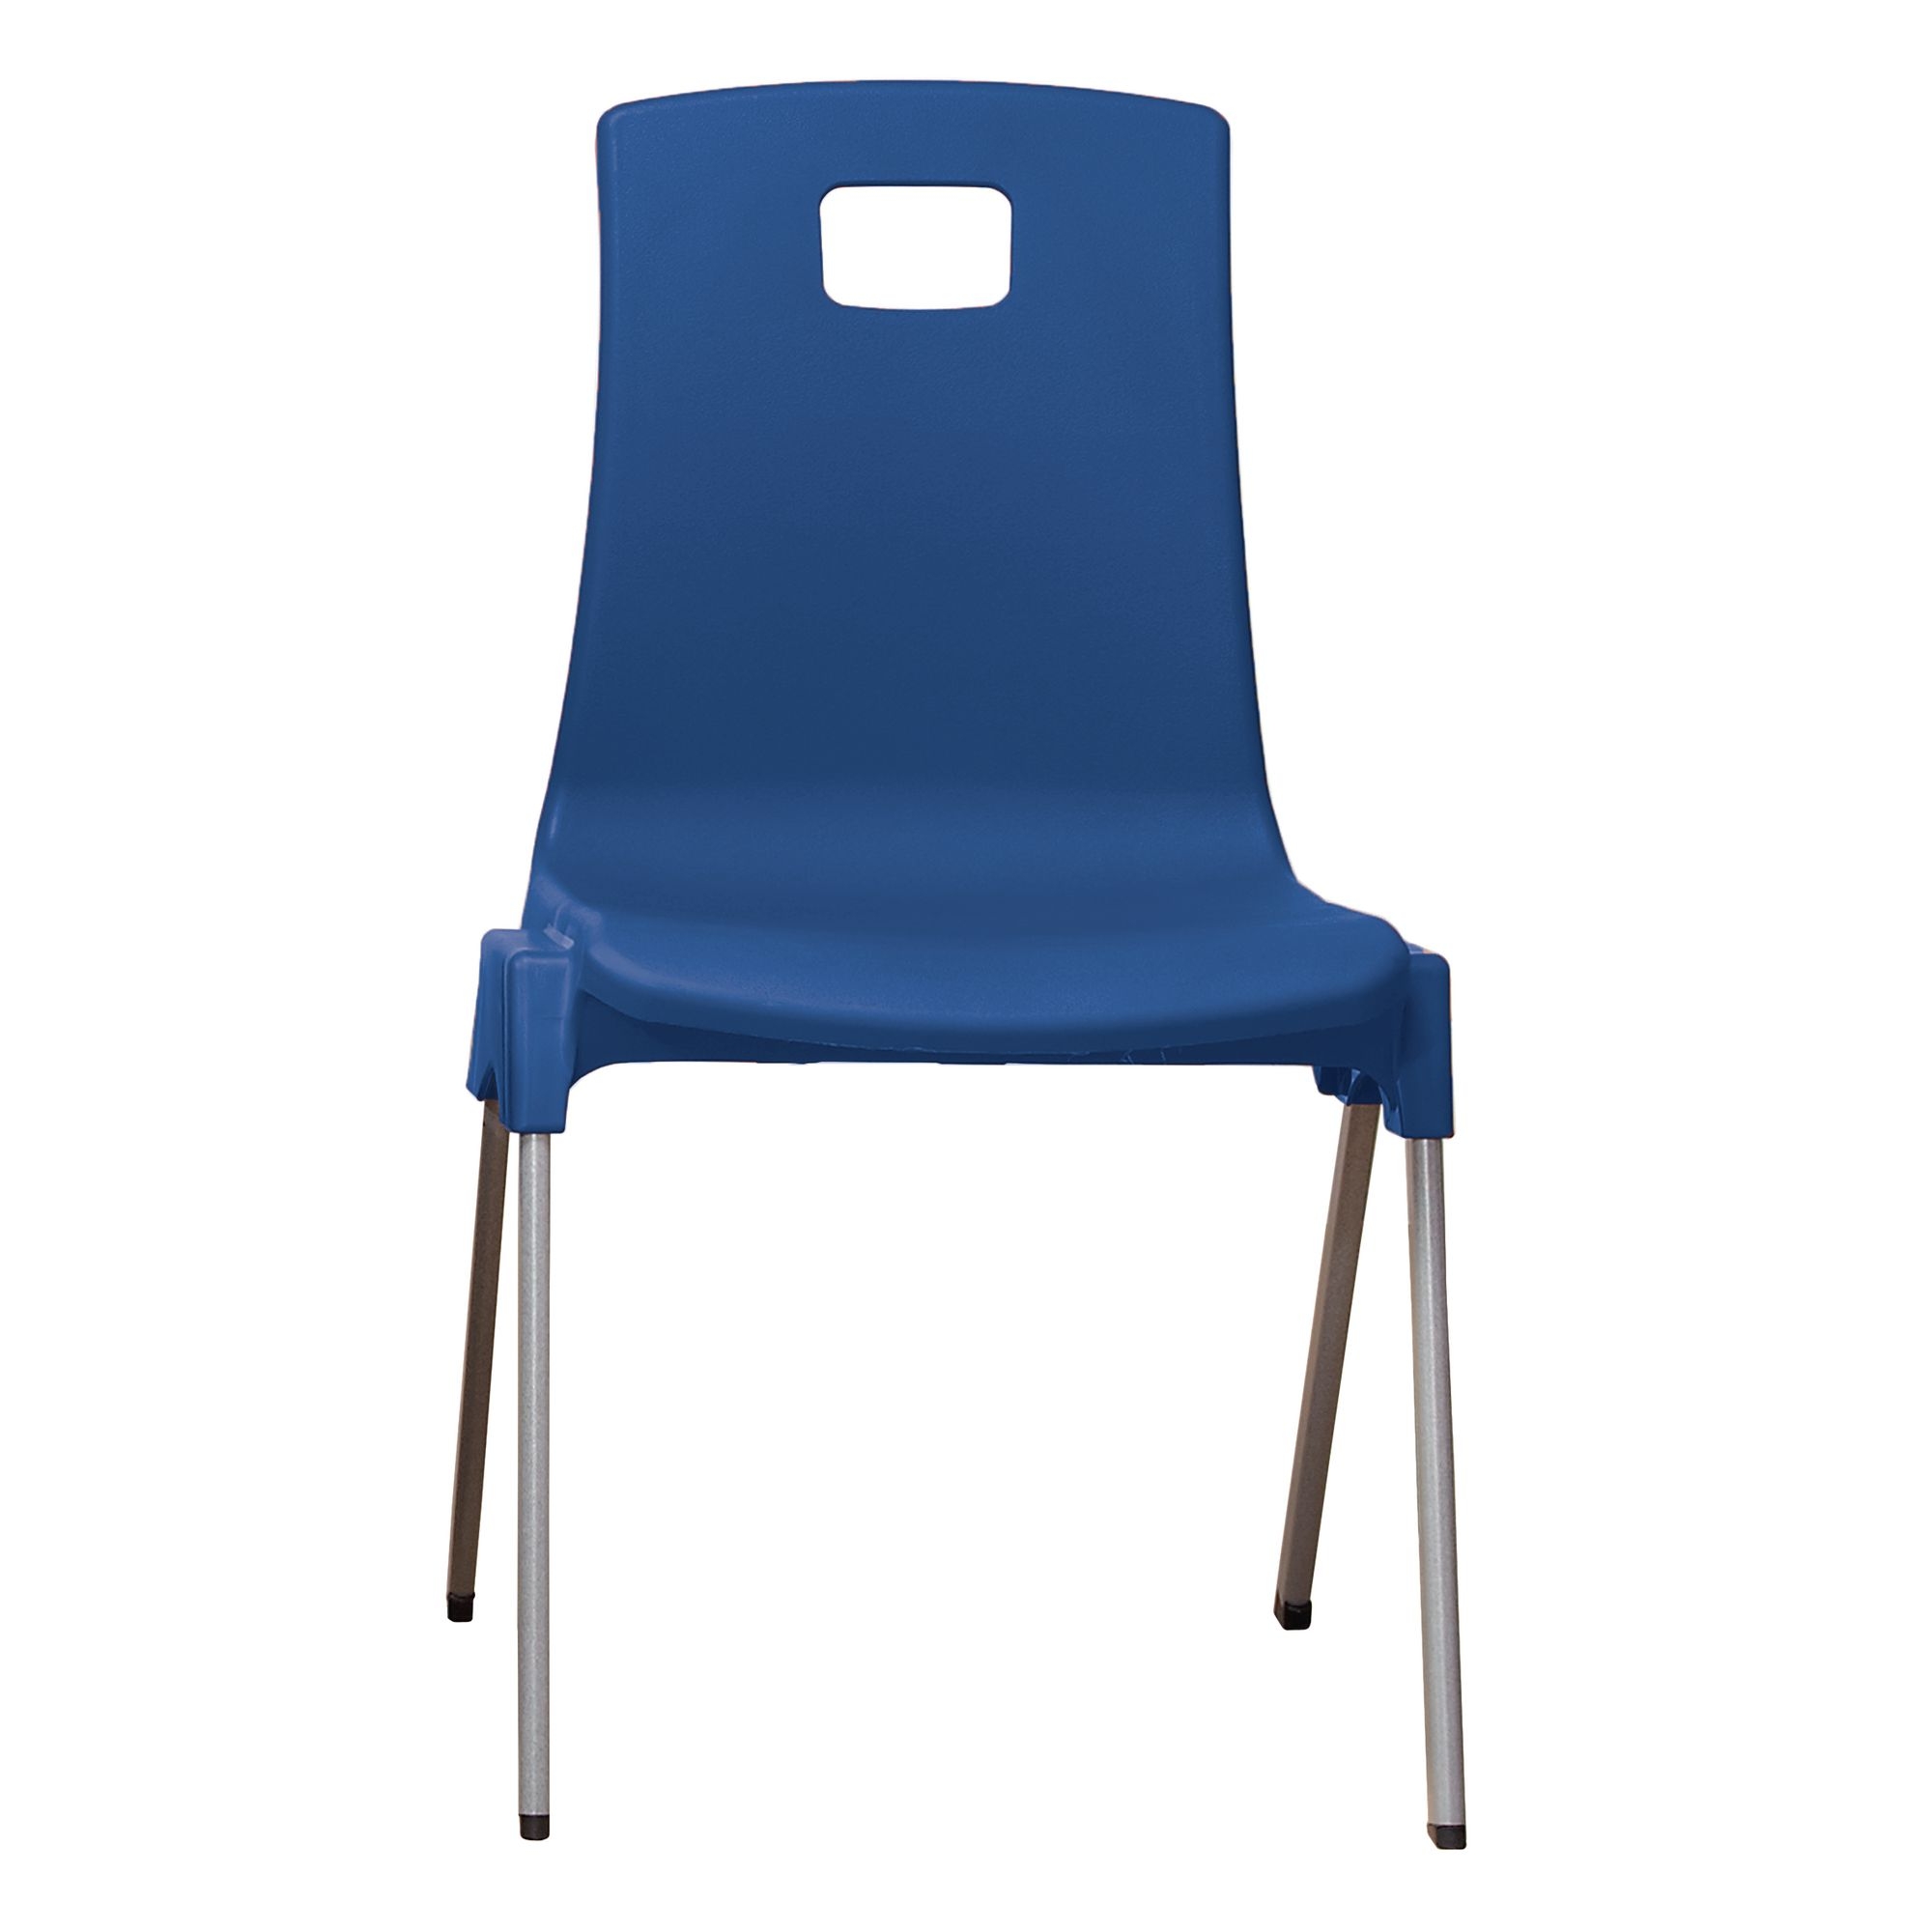 ST Chair - Size B - 310mm - Blue